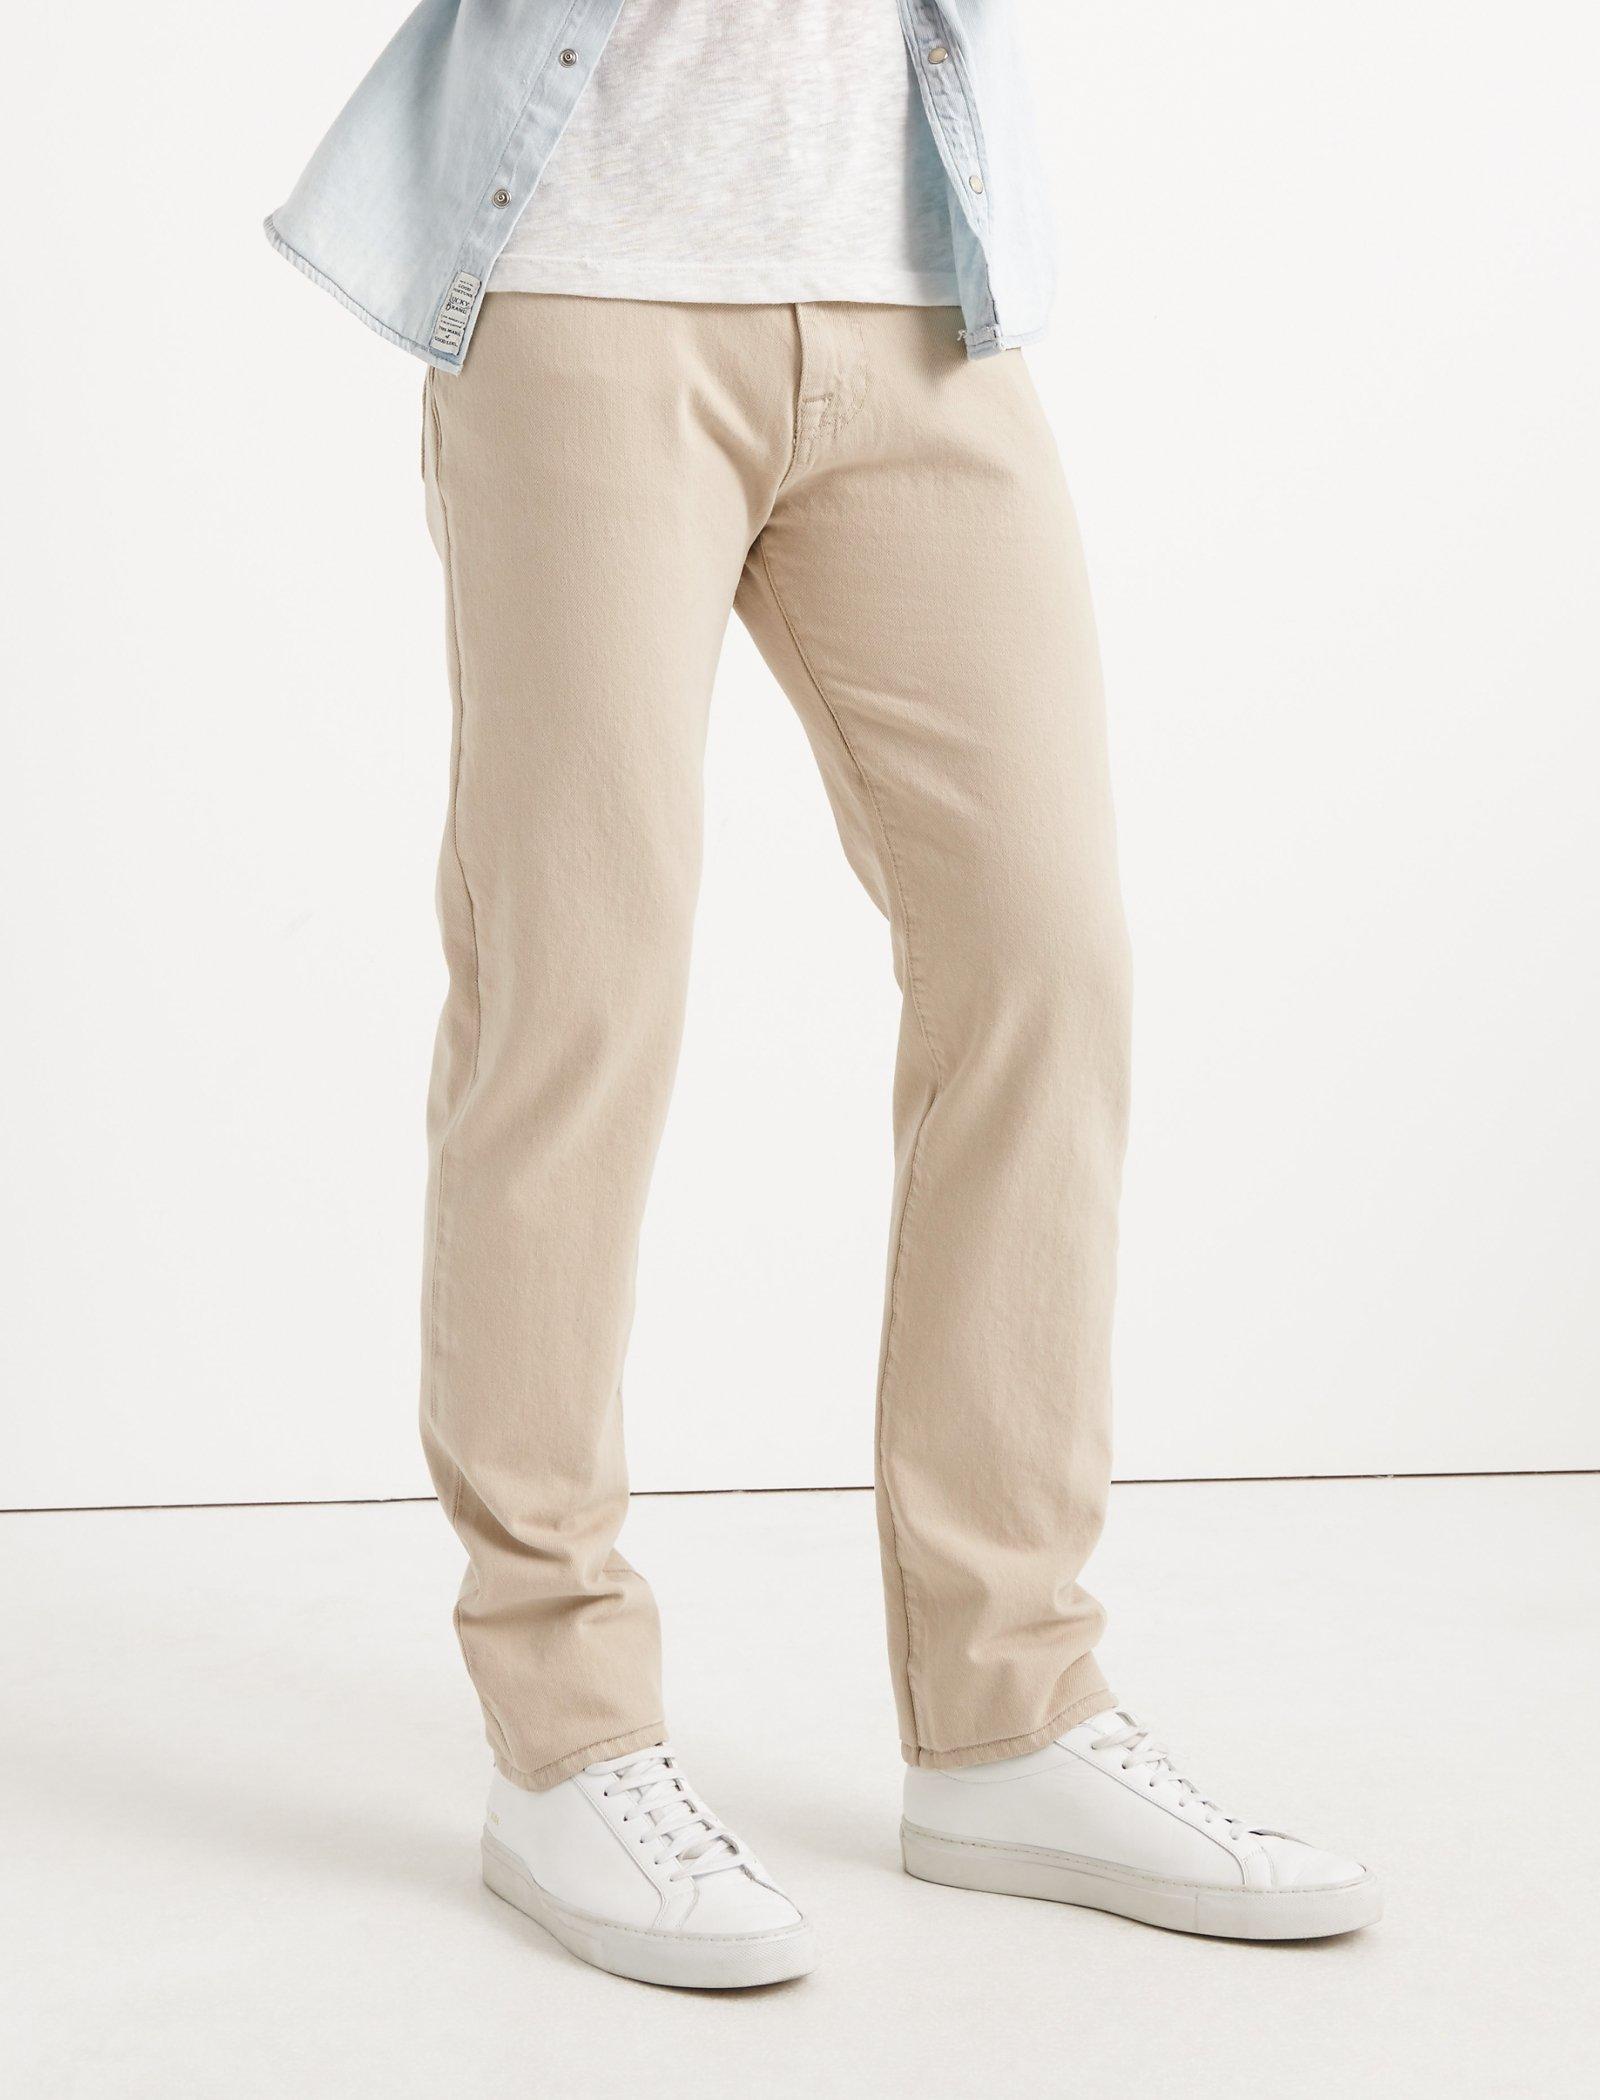 lucky brand 410 athletic chino